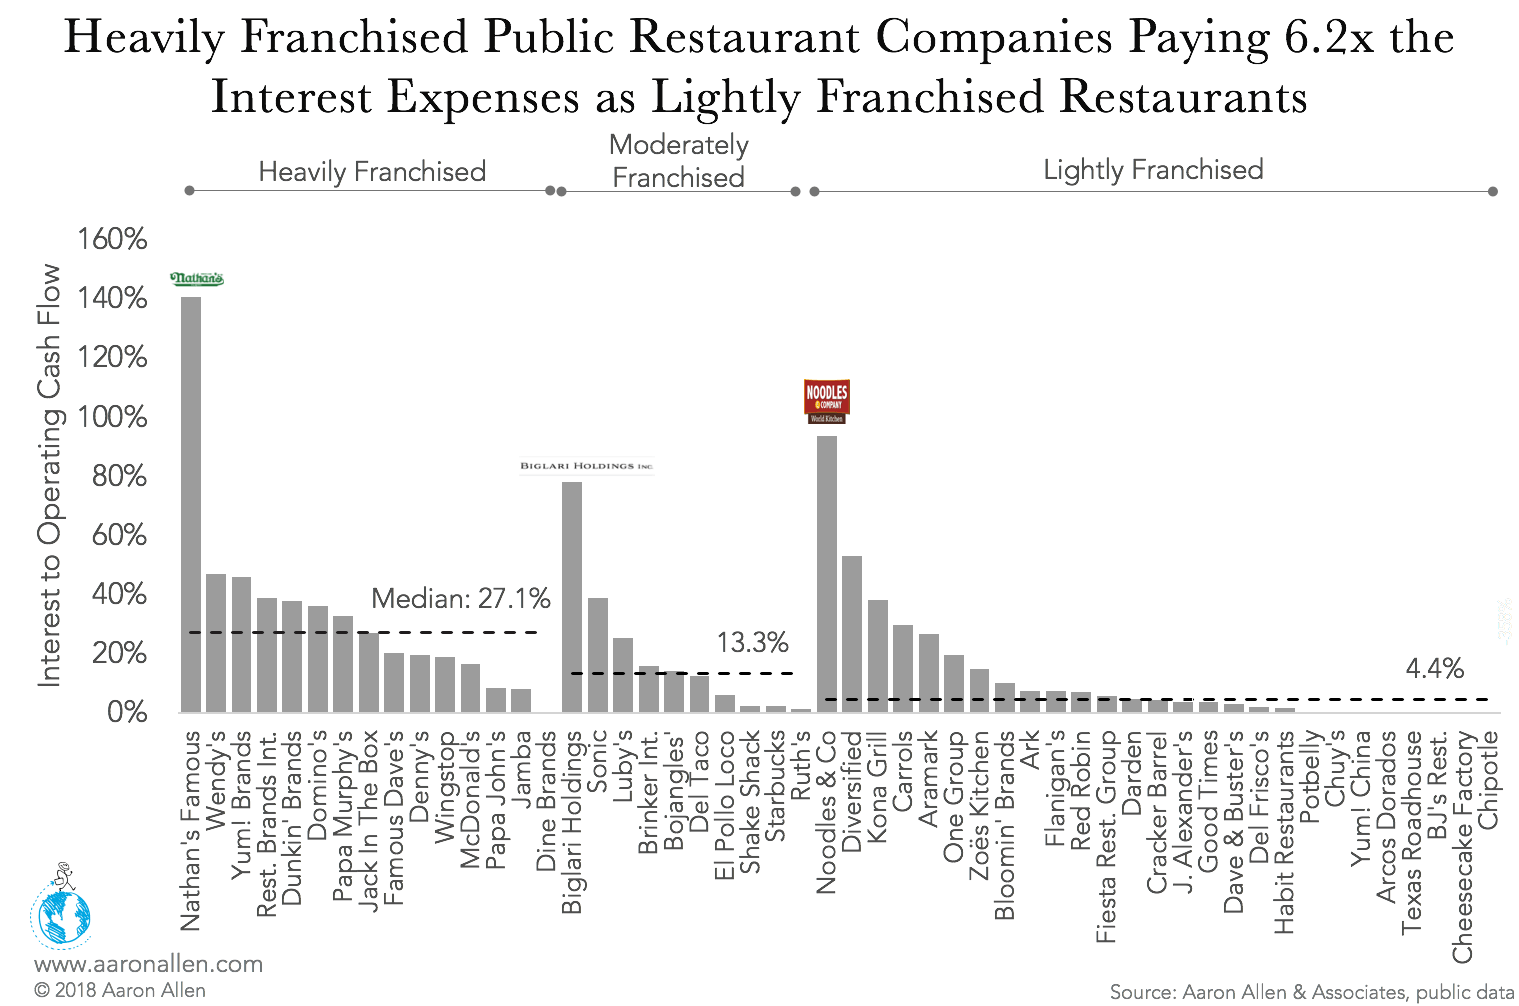 Heavily franchised public restaurant companies paying 6.2x the interest expenses as lightly franchised restaurants